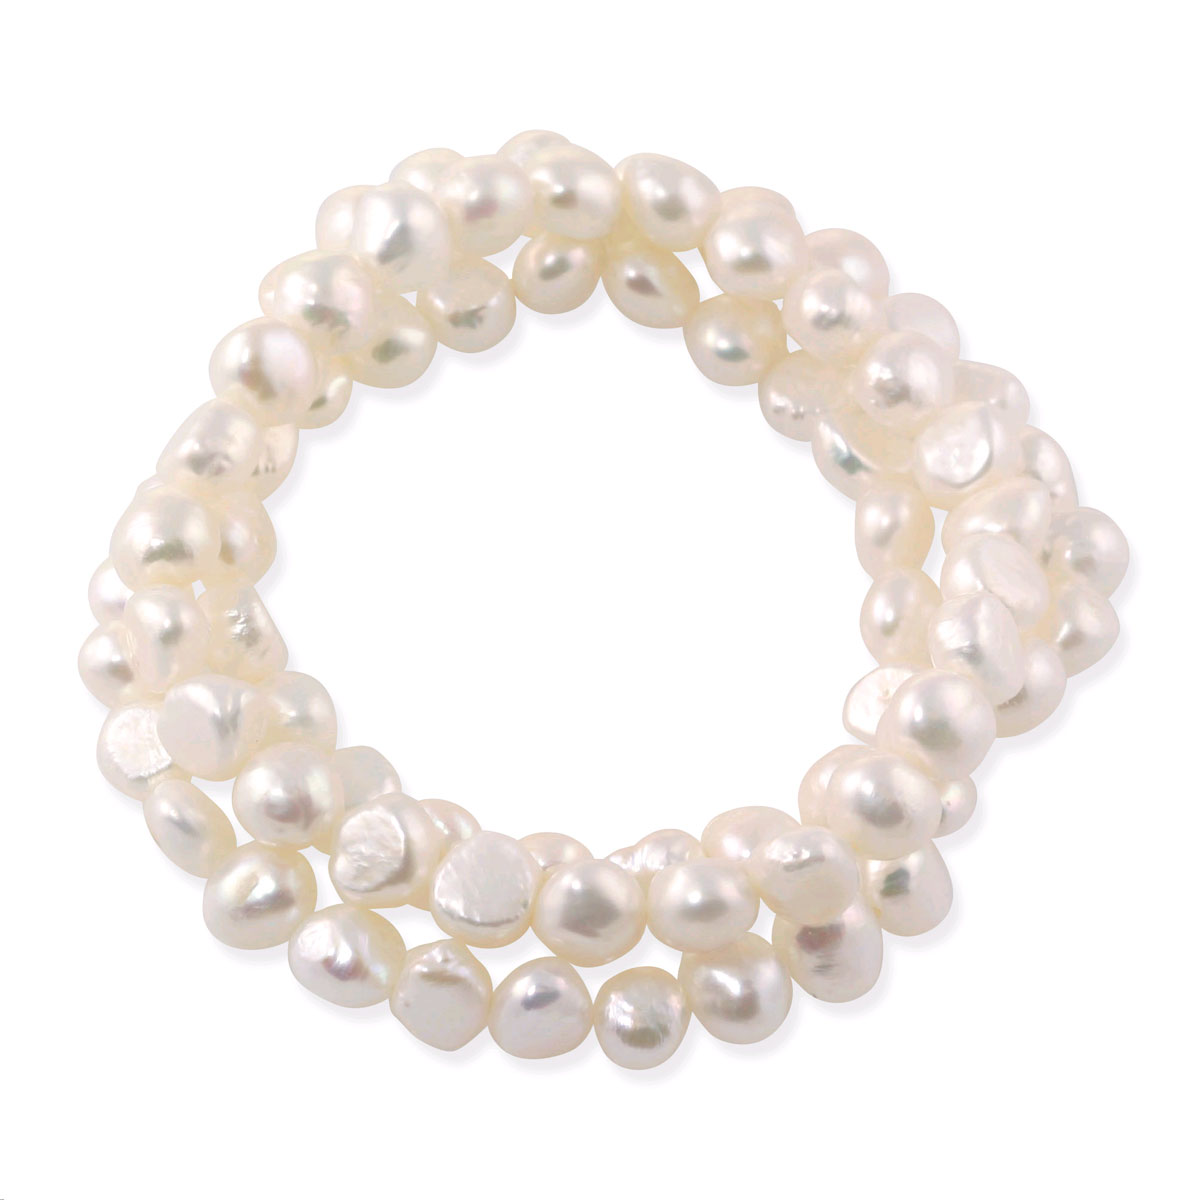 Set of 3 Freshwater Cultured Pearl Stretch Bracelets by TARA Pearls ...